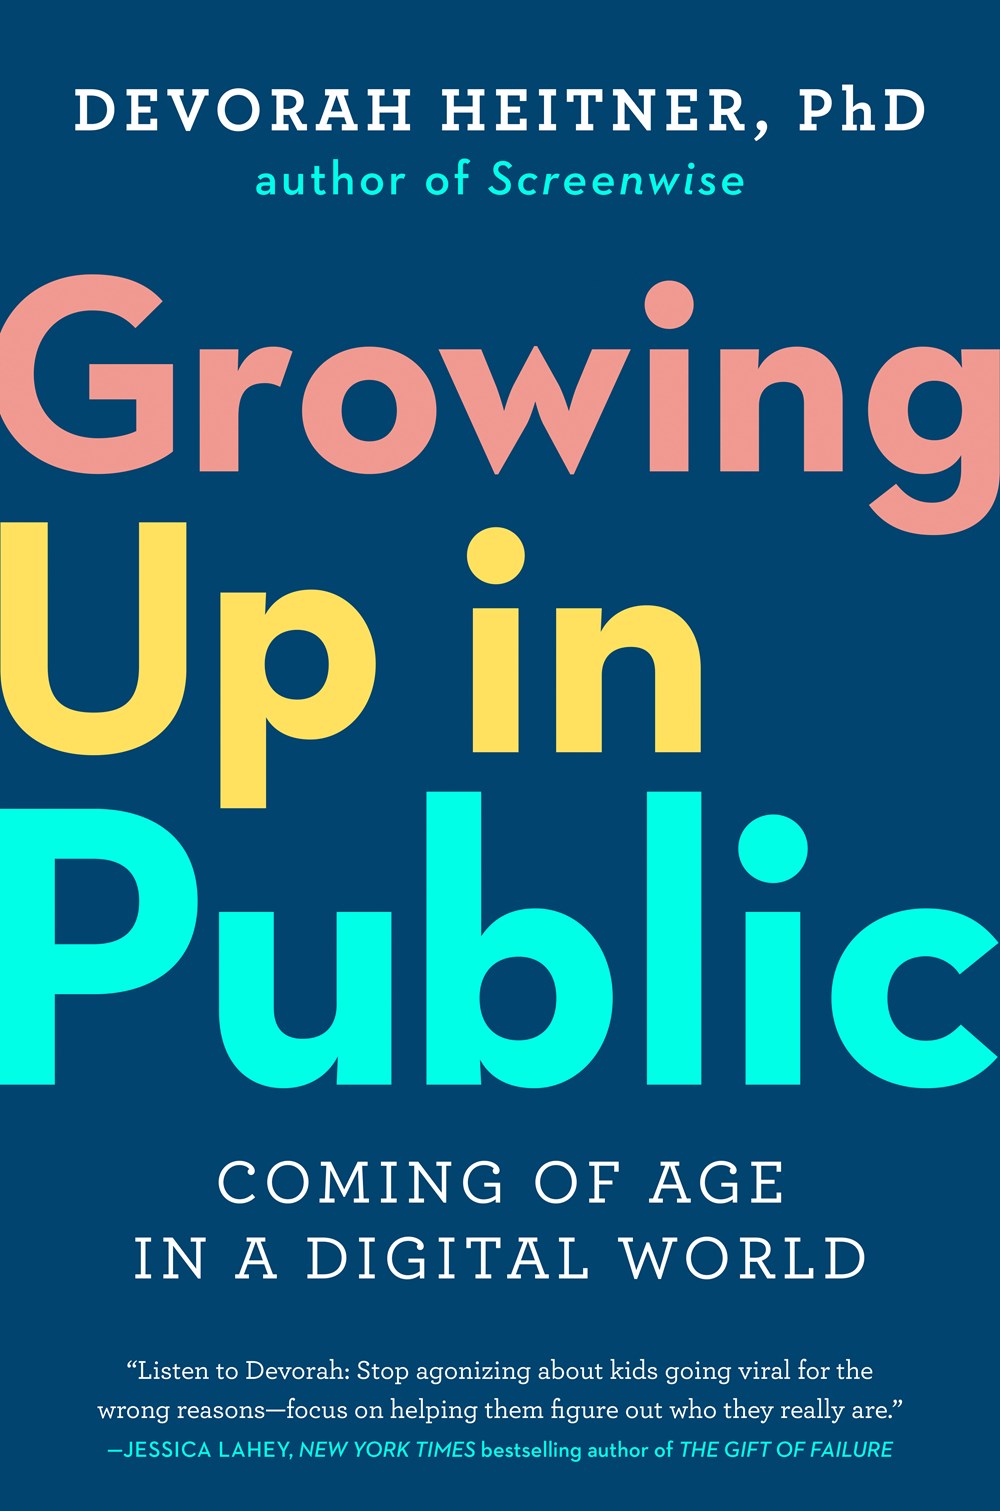  Growing Up in Public: Coming of Age in a Digital World